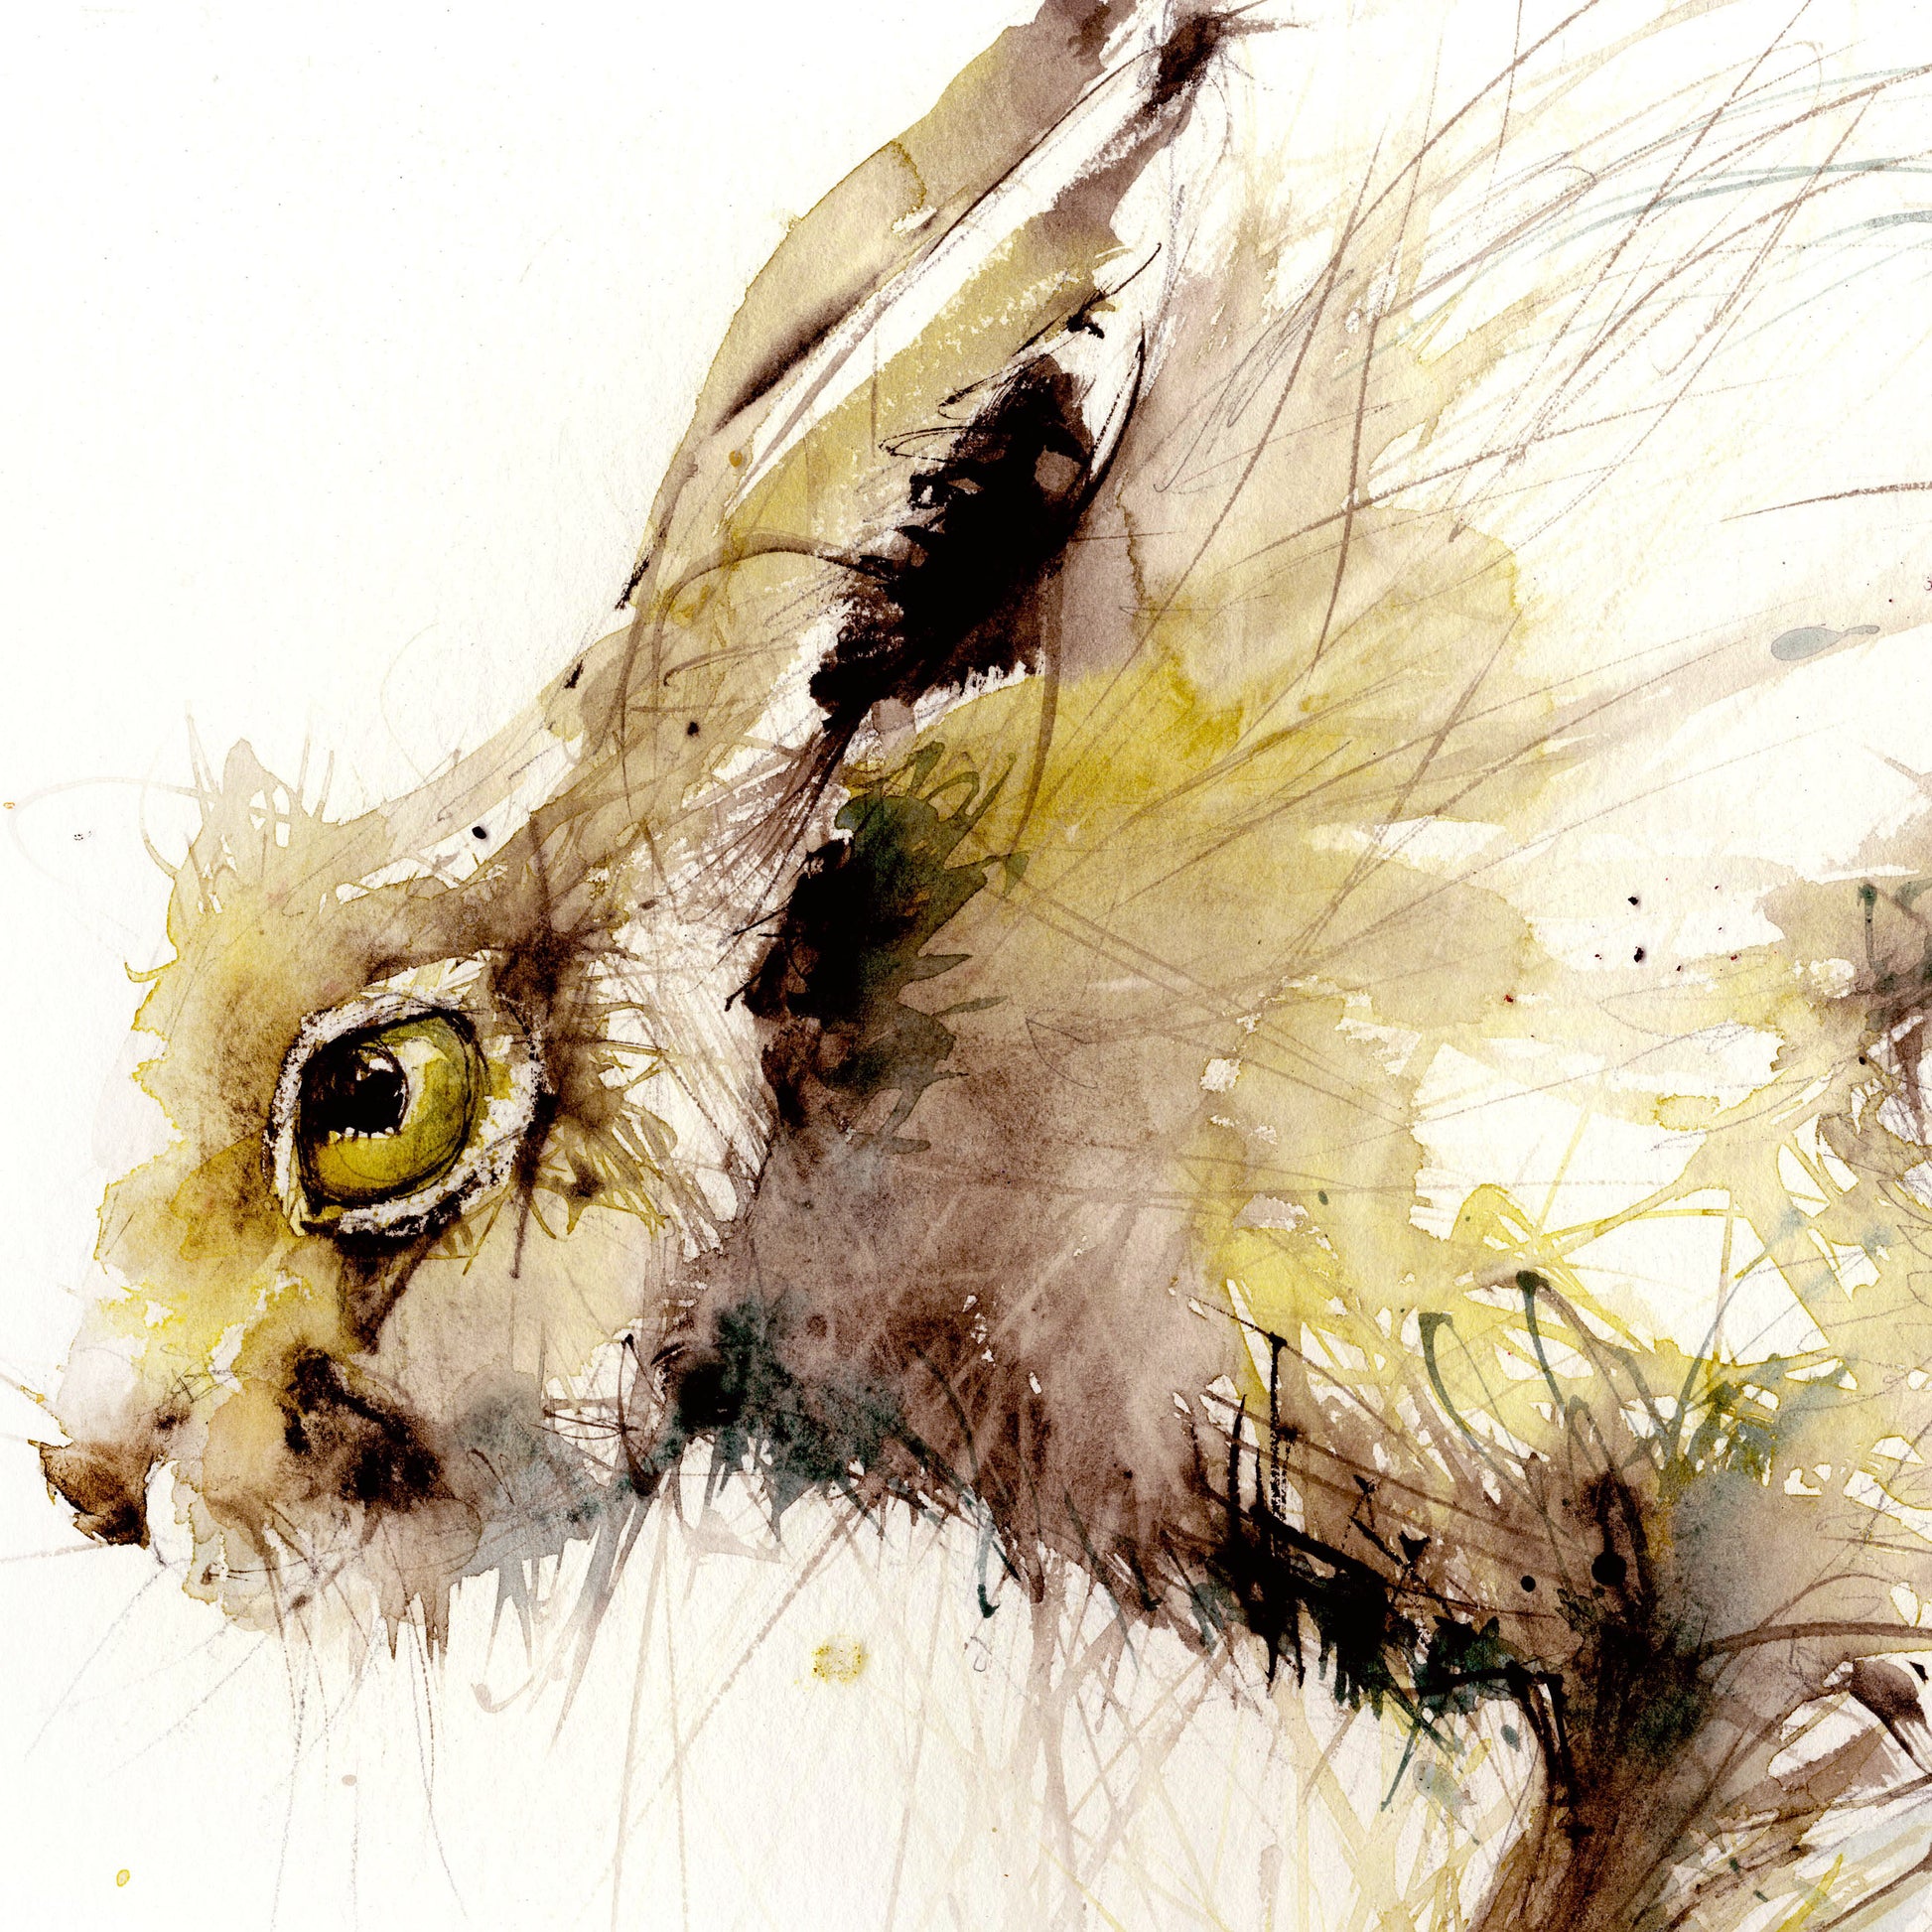 Limited edition hare print "Will" - Jen Buckley Art limited edition animal art prints